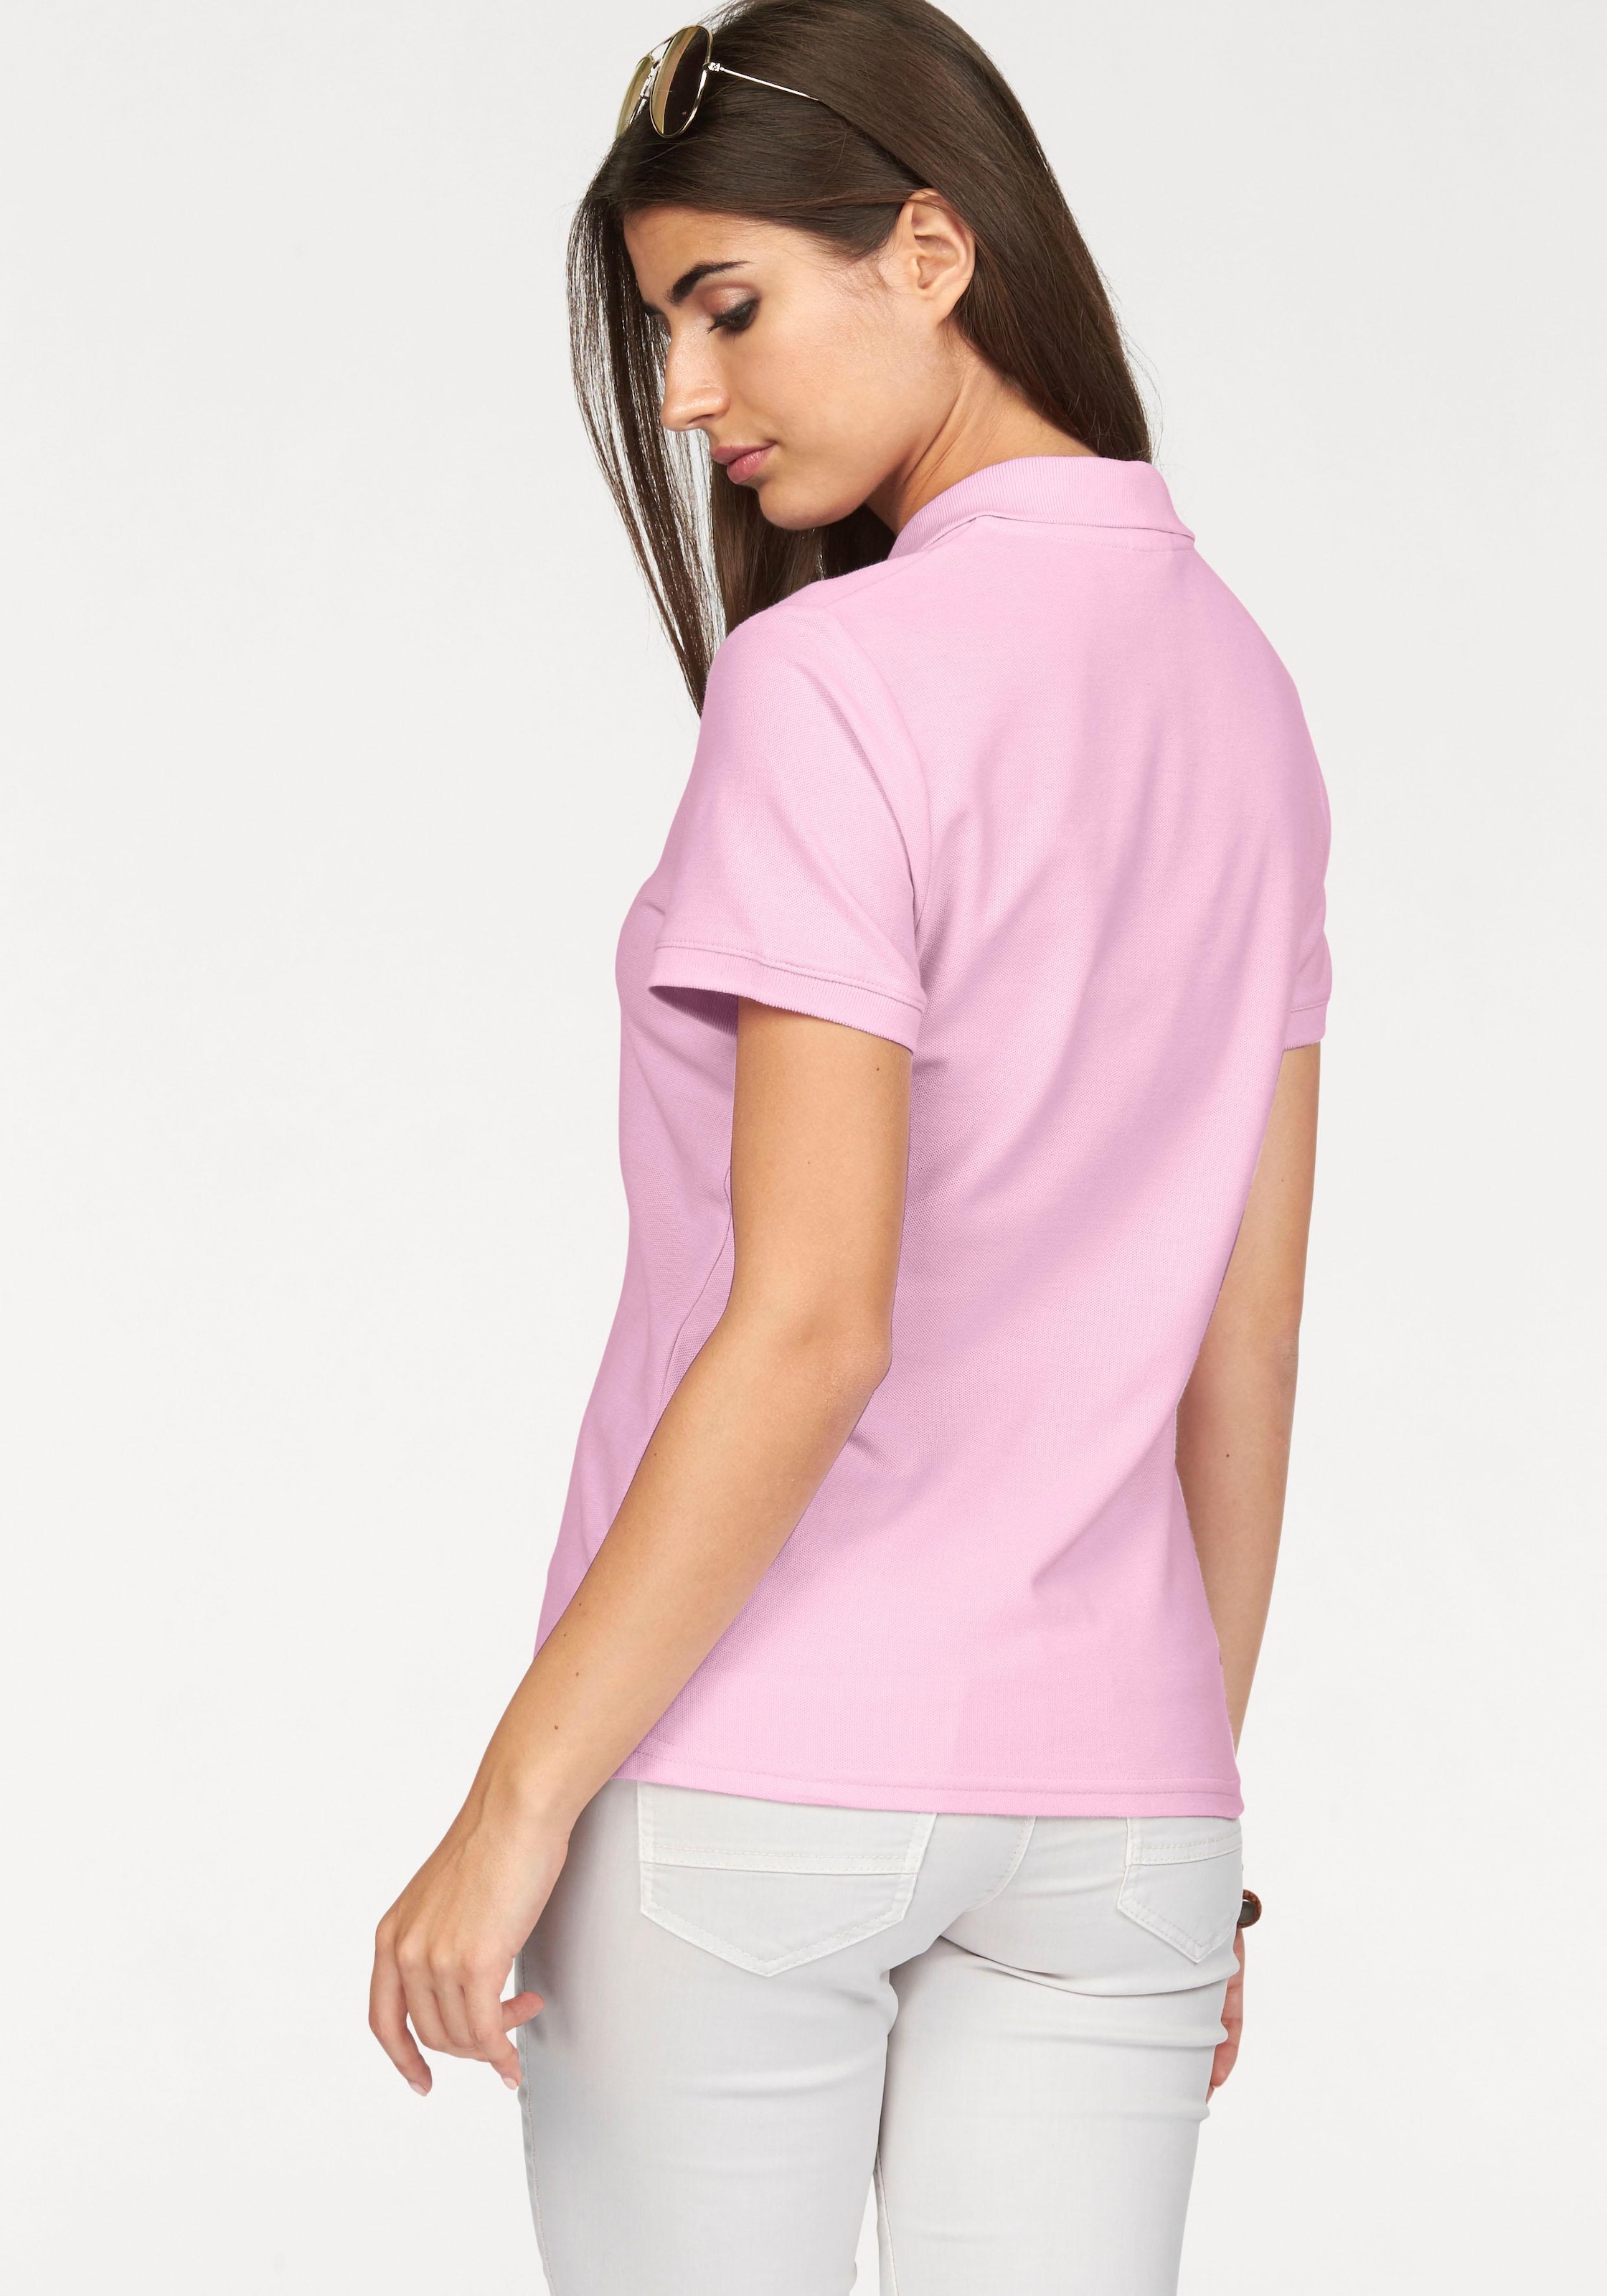 »Lady-Fit the of bei Poloshirt Loom OTTO Fruit online Polo« Premium